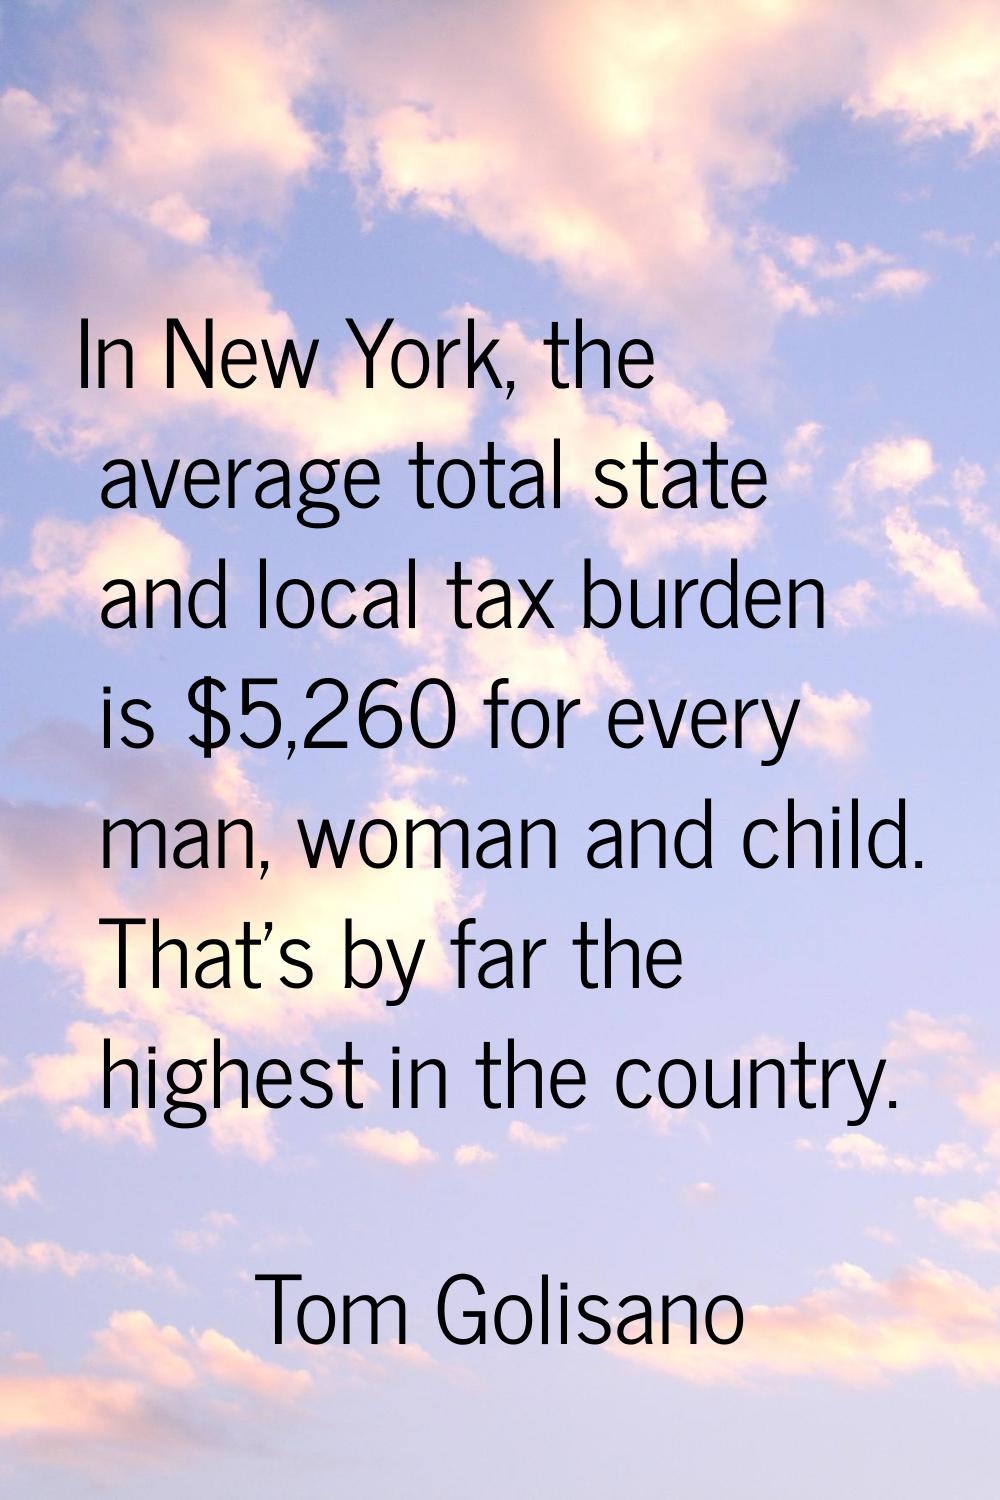 In New York, the average total state and local tax burden is $5,260 for every man, woman and child.